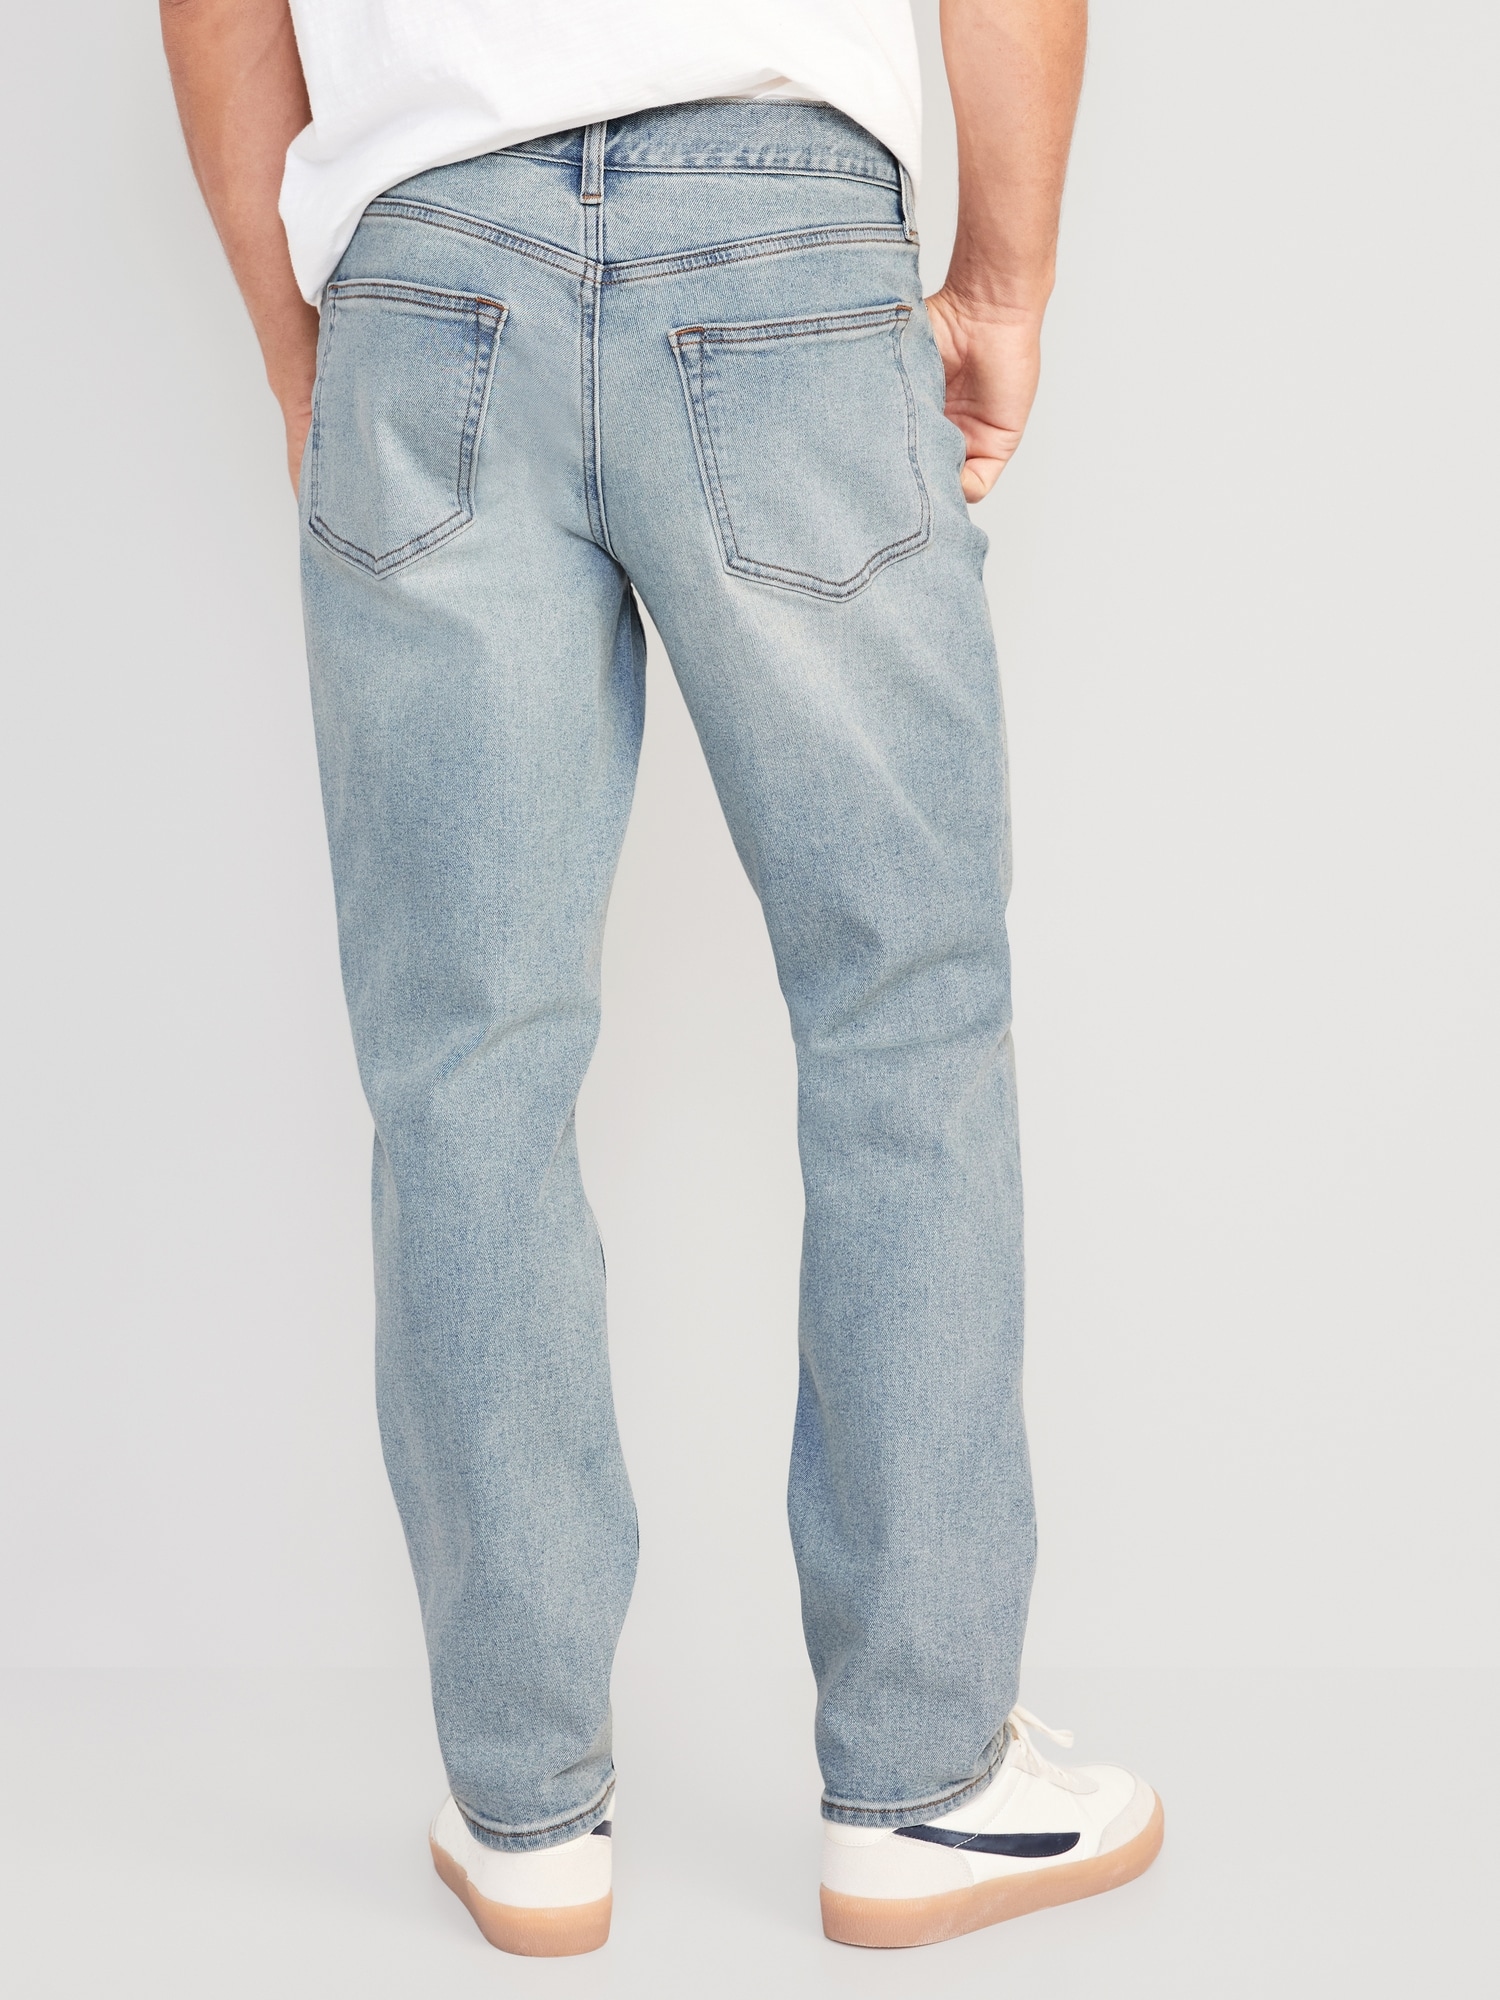 Athletic Taper Jeans | Old Navy